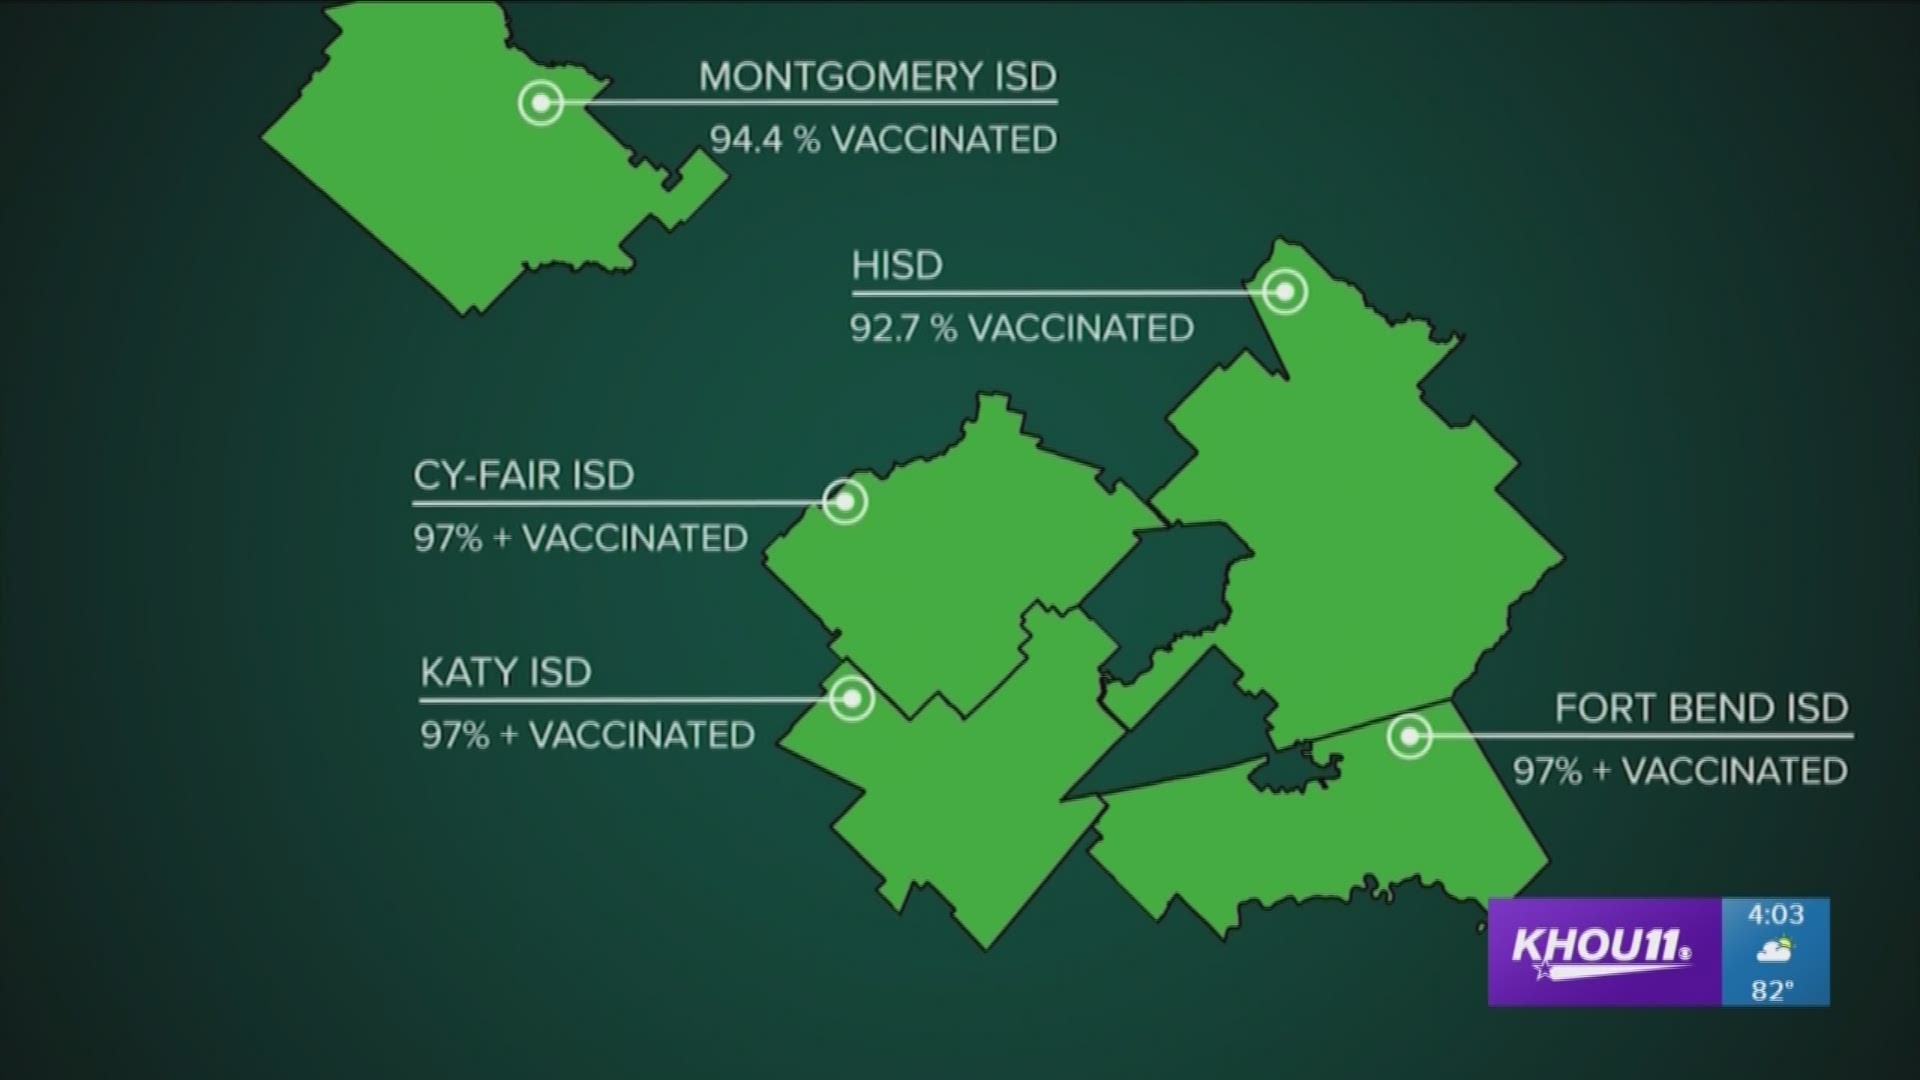 KHOU 11 reporter Stephanie Whitfield takes a look at the measles virus and vaccinations against it.